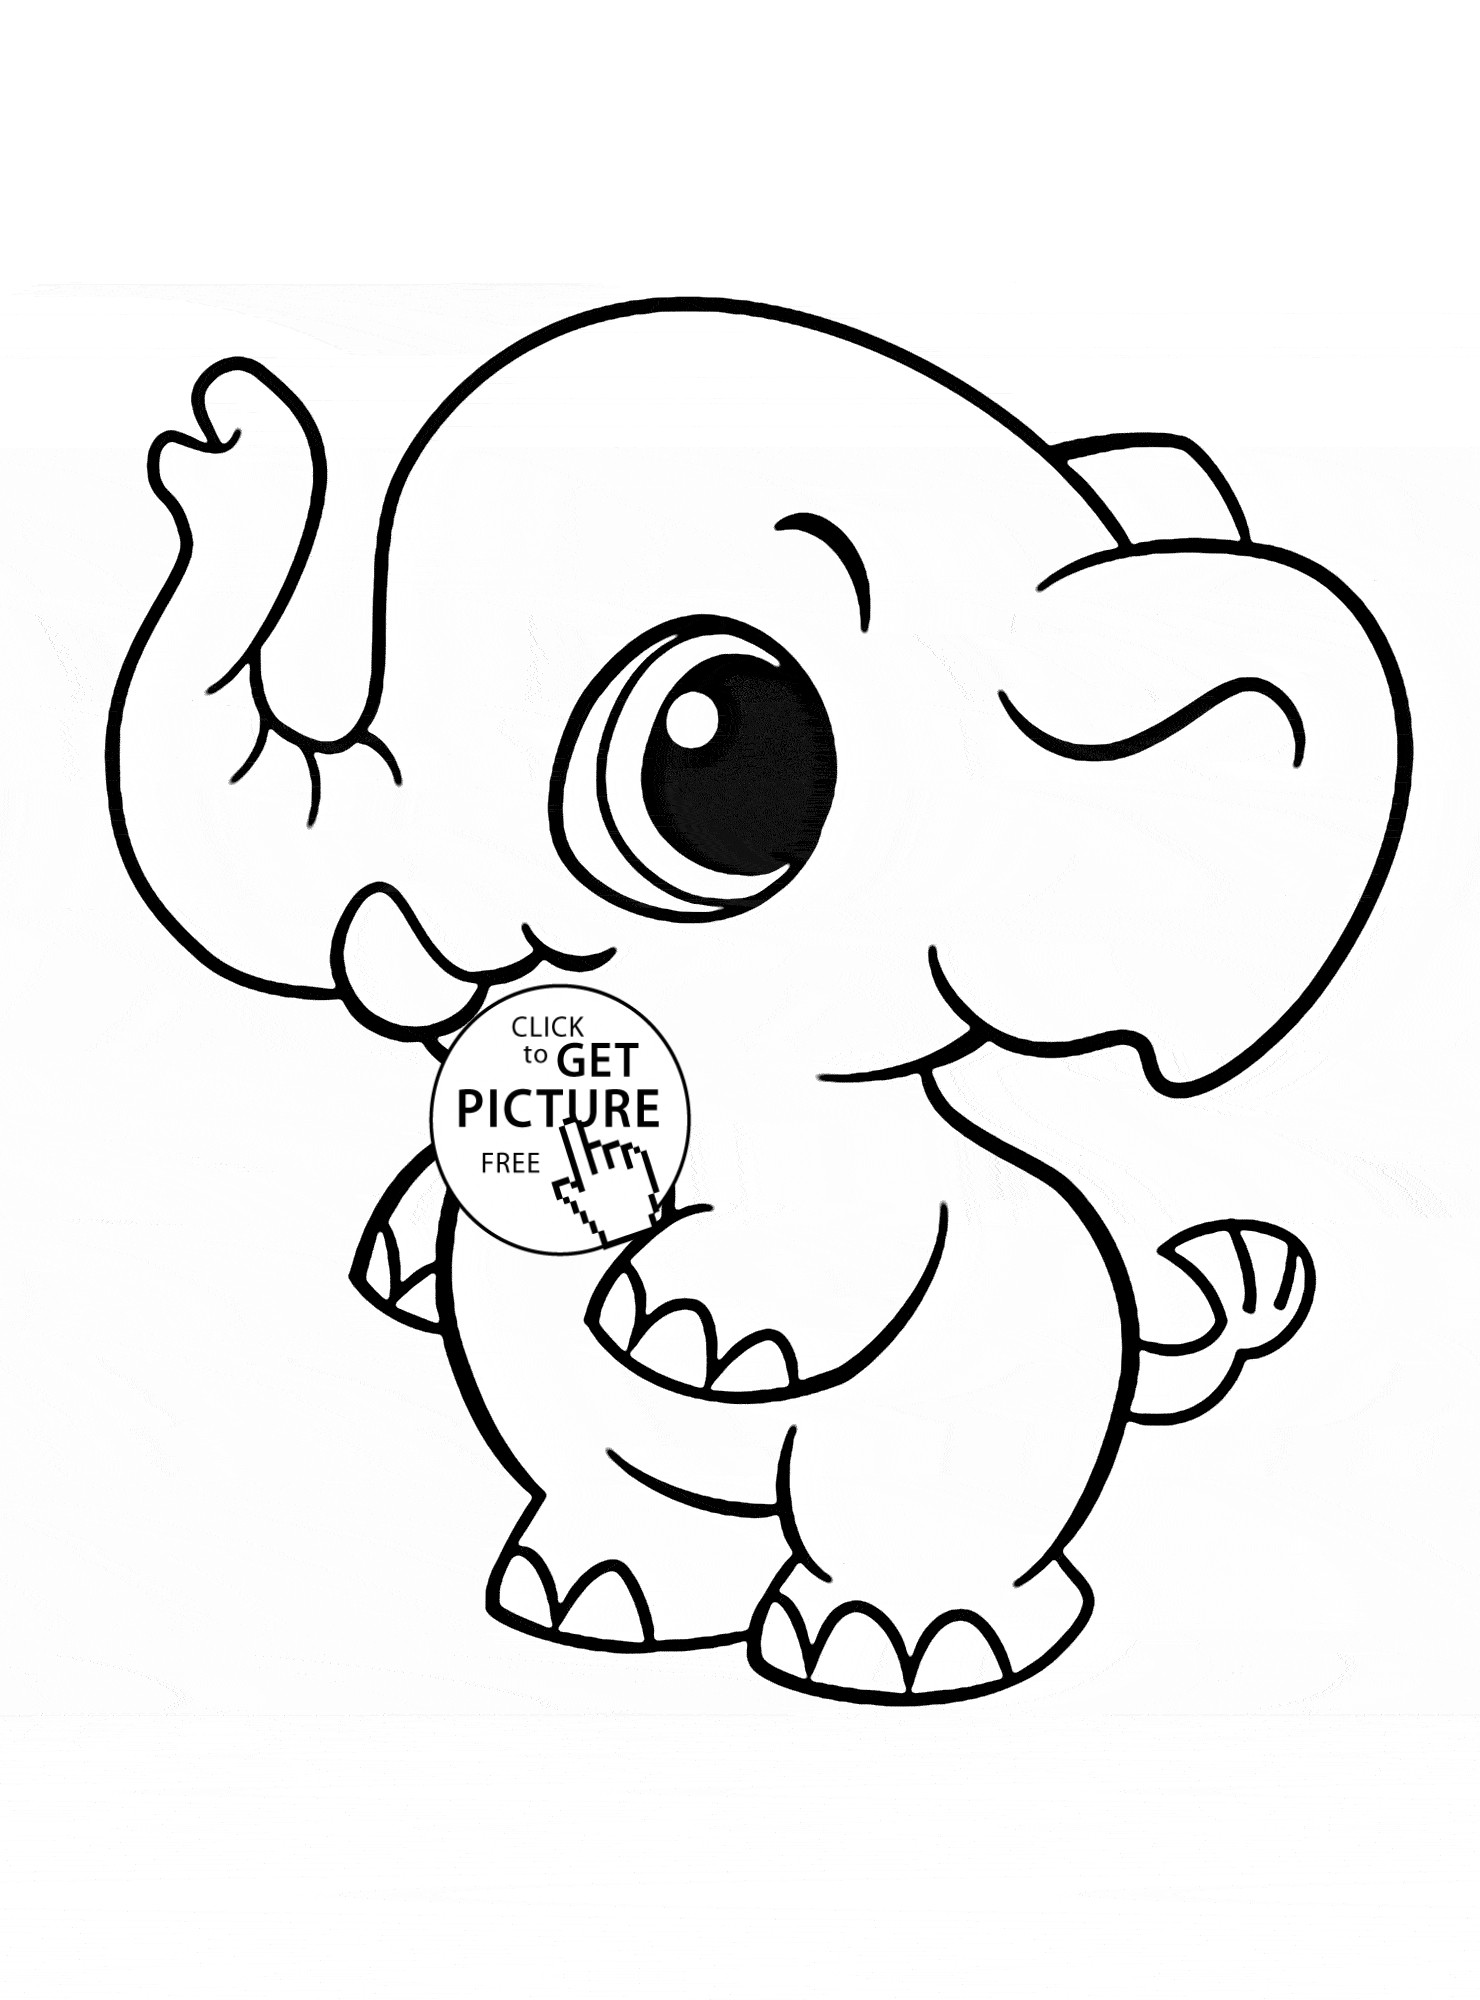 cute animals with big eyes coloring pages elegant funny animals coloring page cute dog coloring pages printable of cute animals with big eyes coloring pages